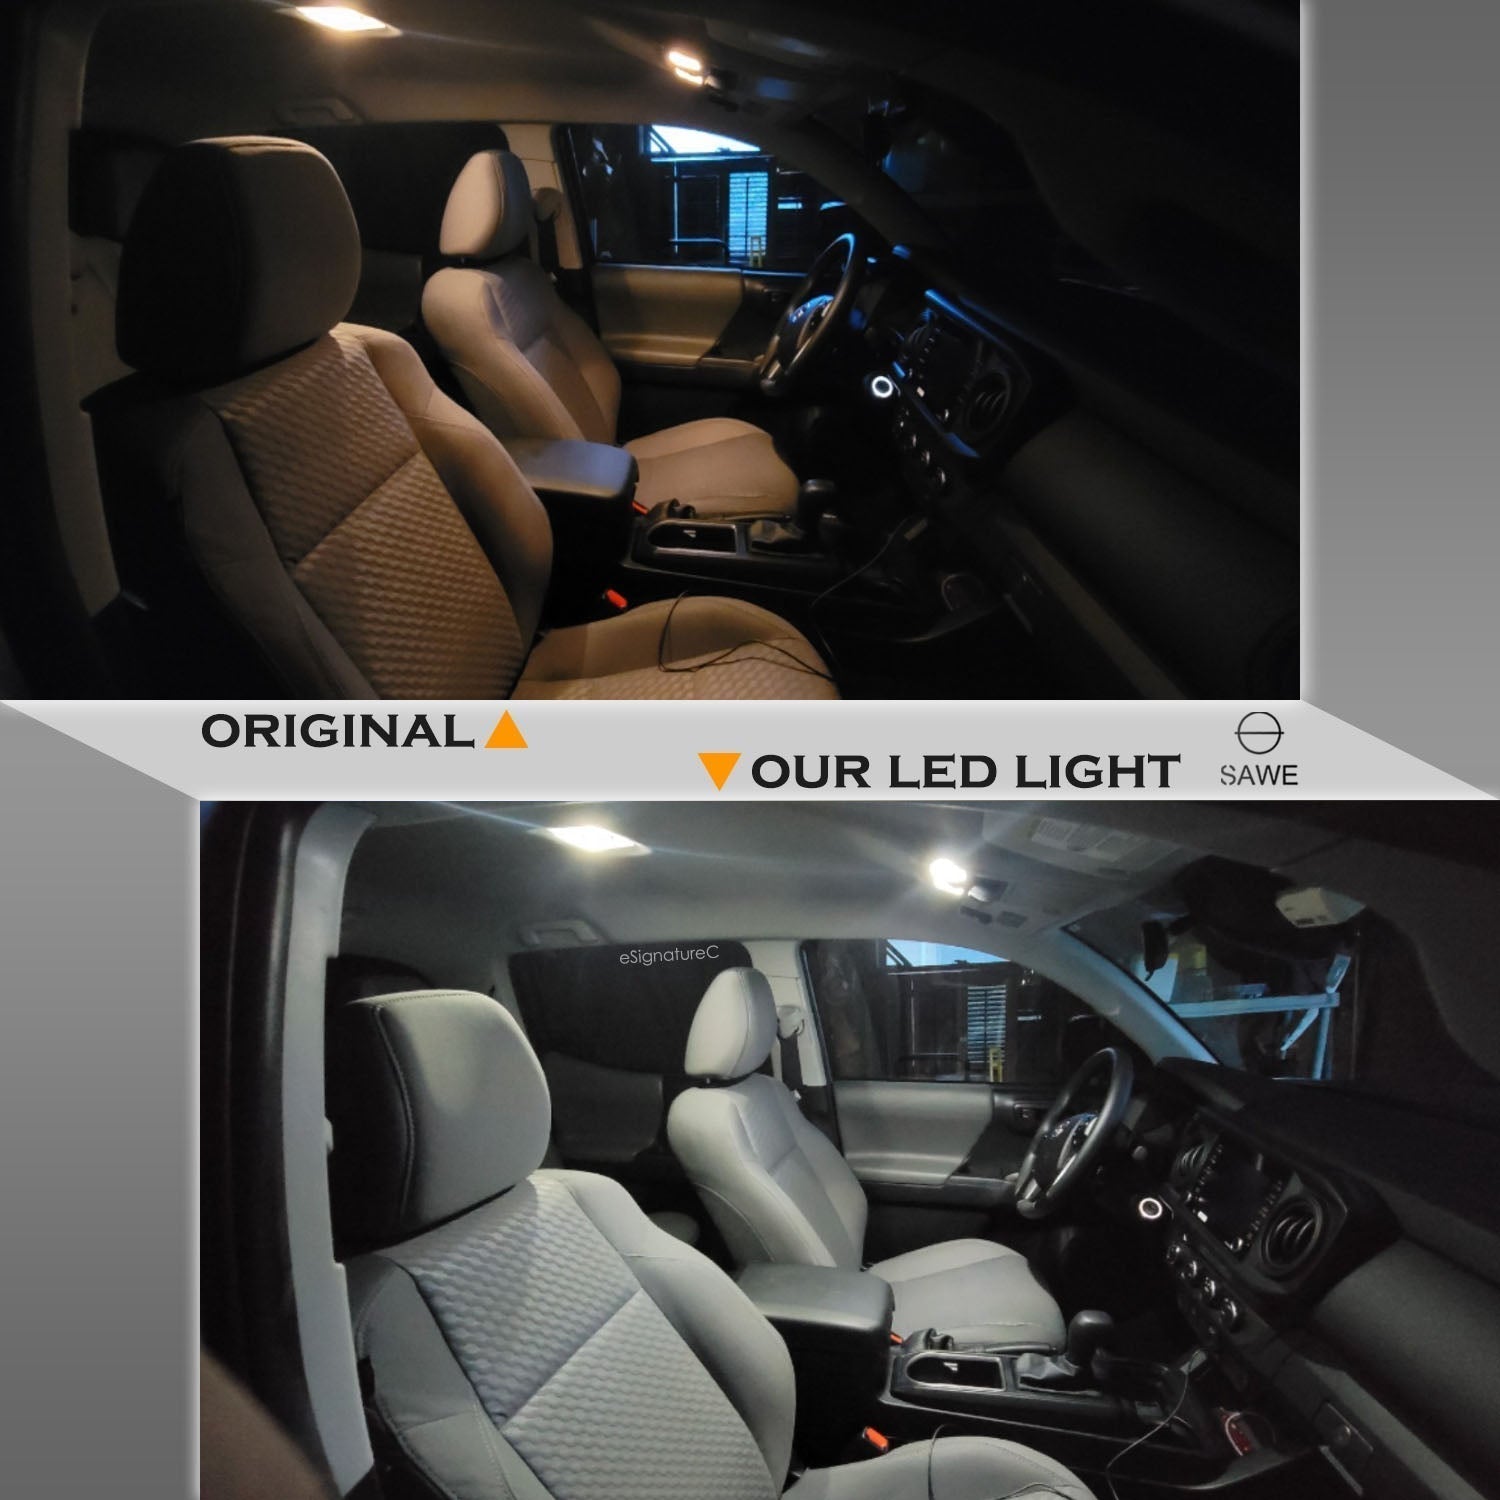 For Hyundai Genesis Coupe Interior LED Lights - Dome & Map Light Bulbs Package Kit for 2010 - 2016 - White